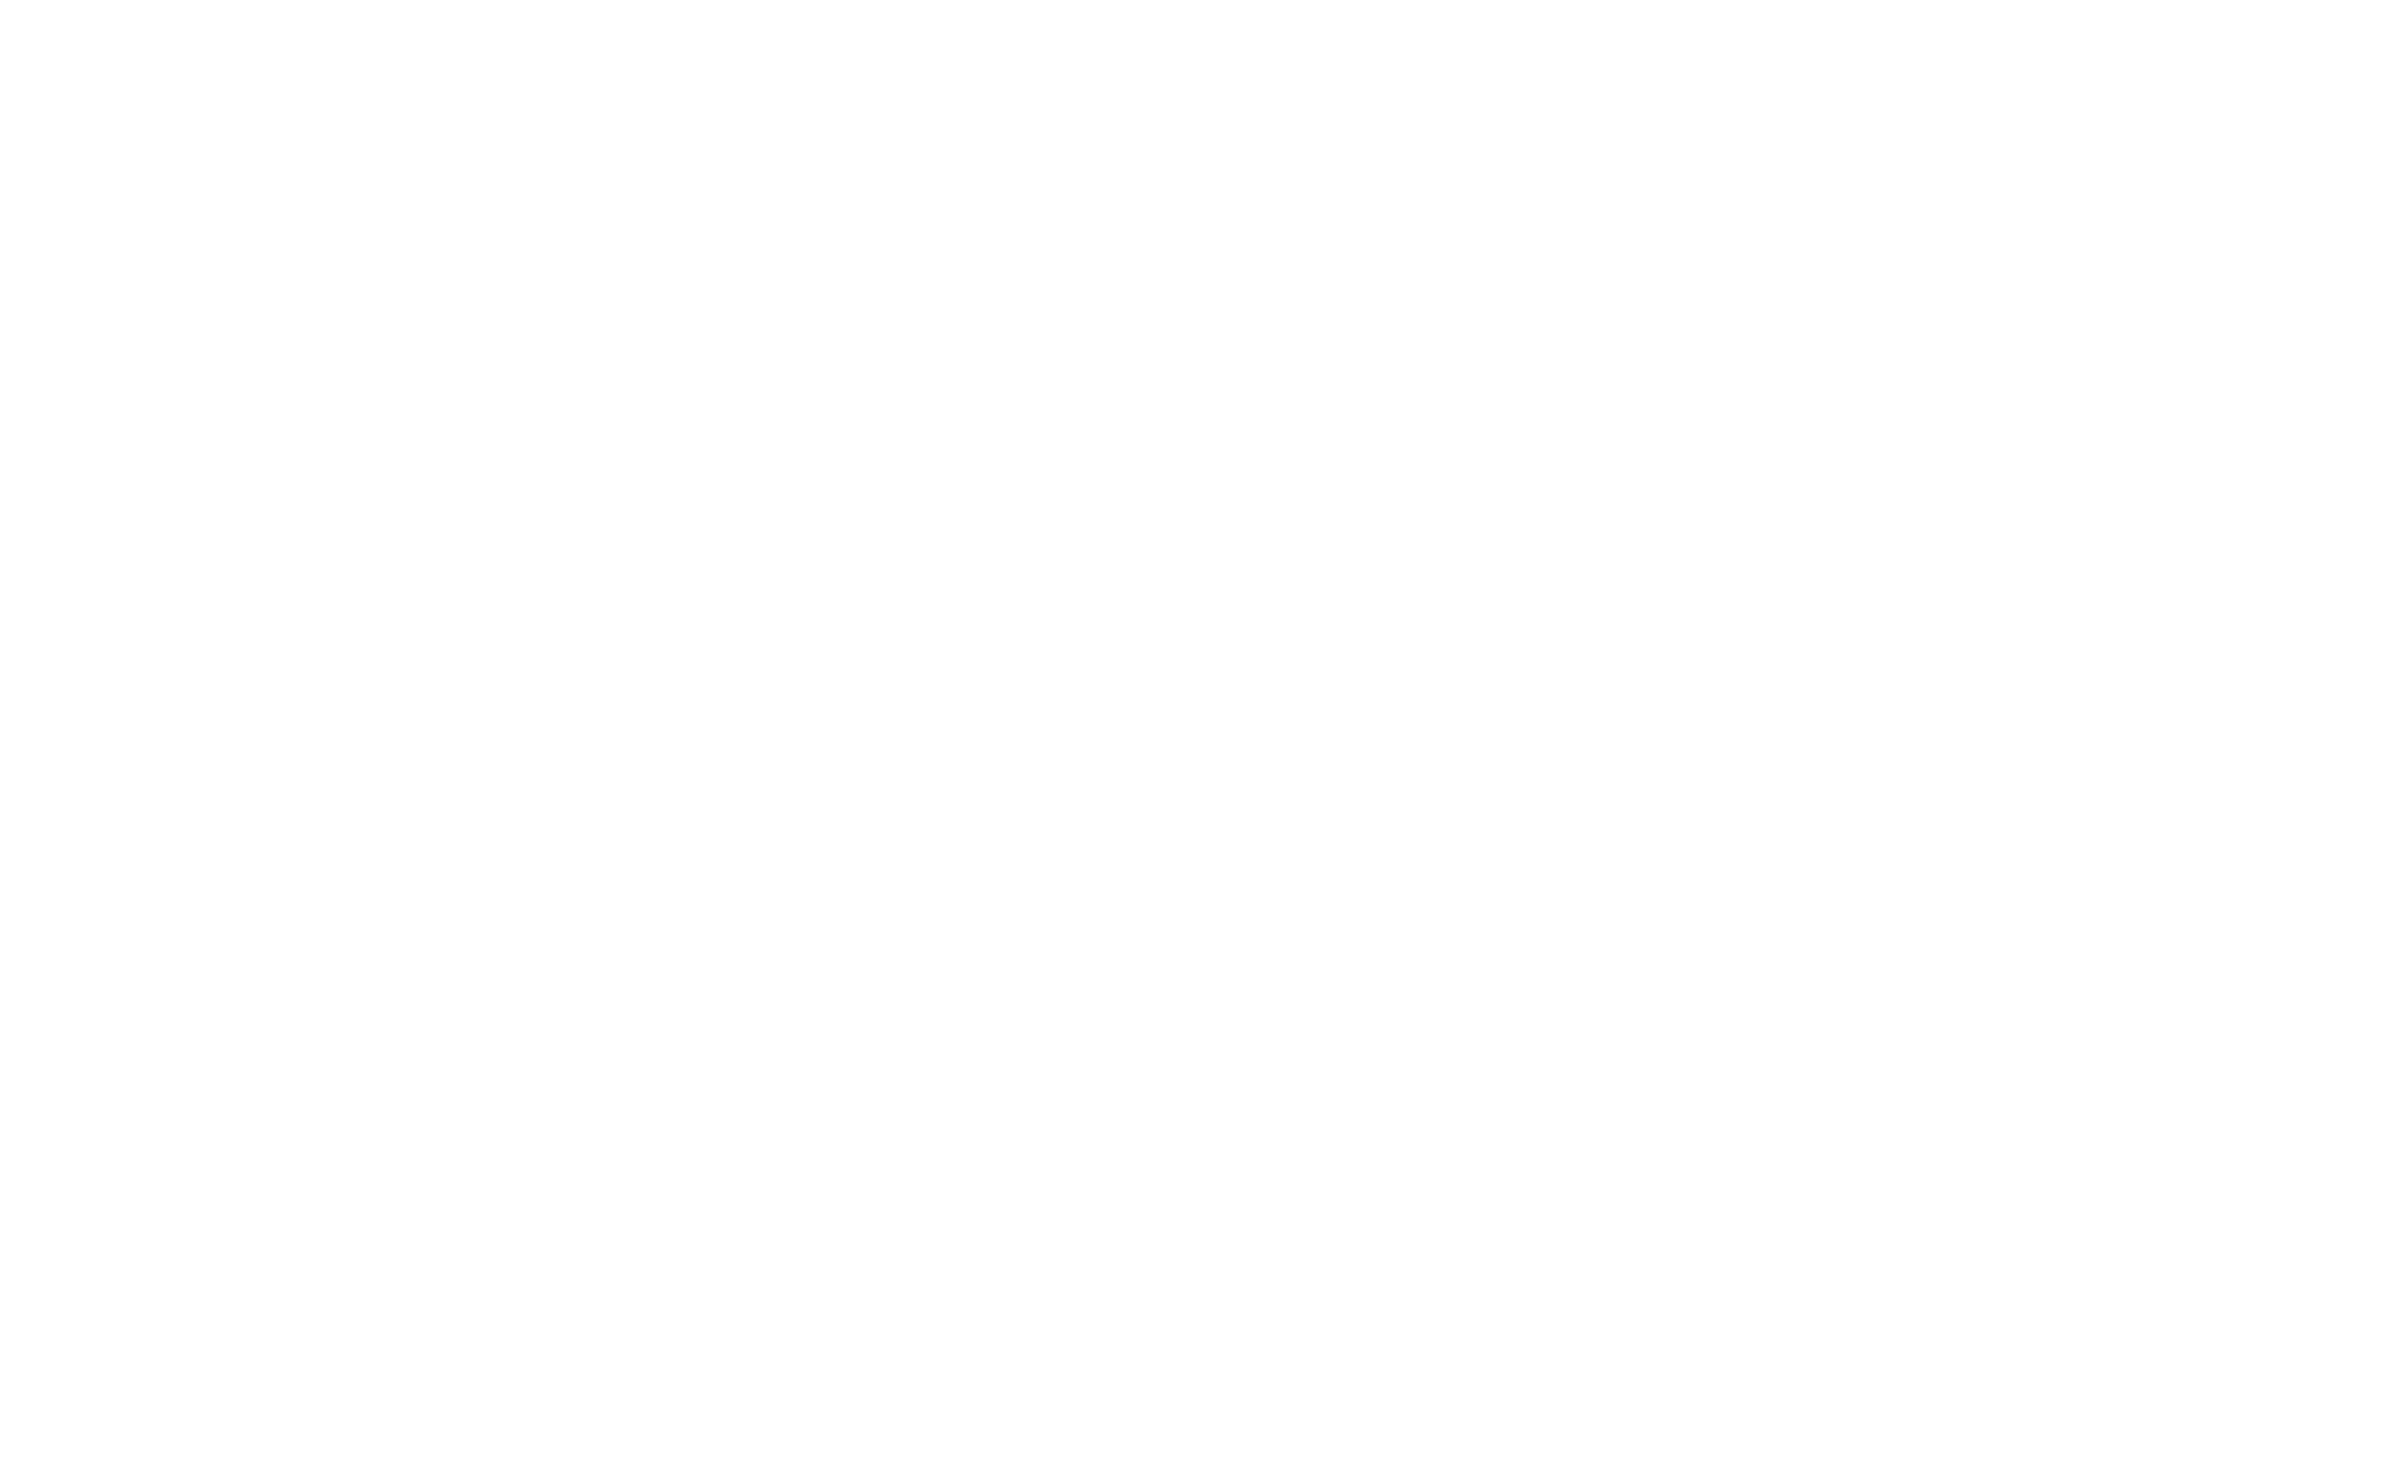 White logo on transparent background that says "Dine Out for Maple Alley Inn" over a plate-and-fork graphic design